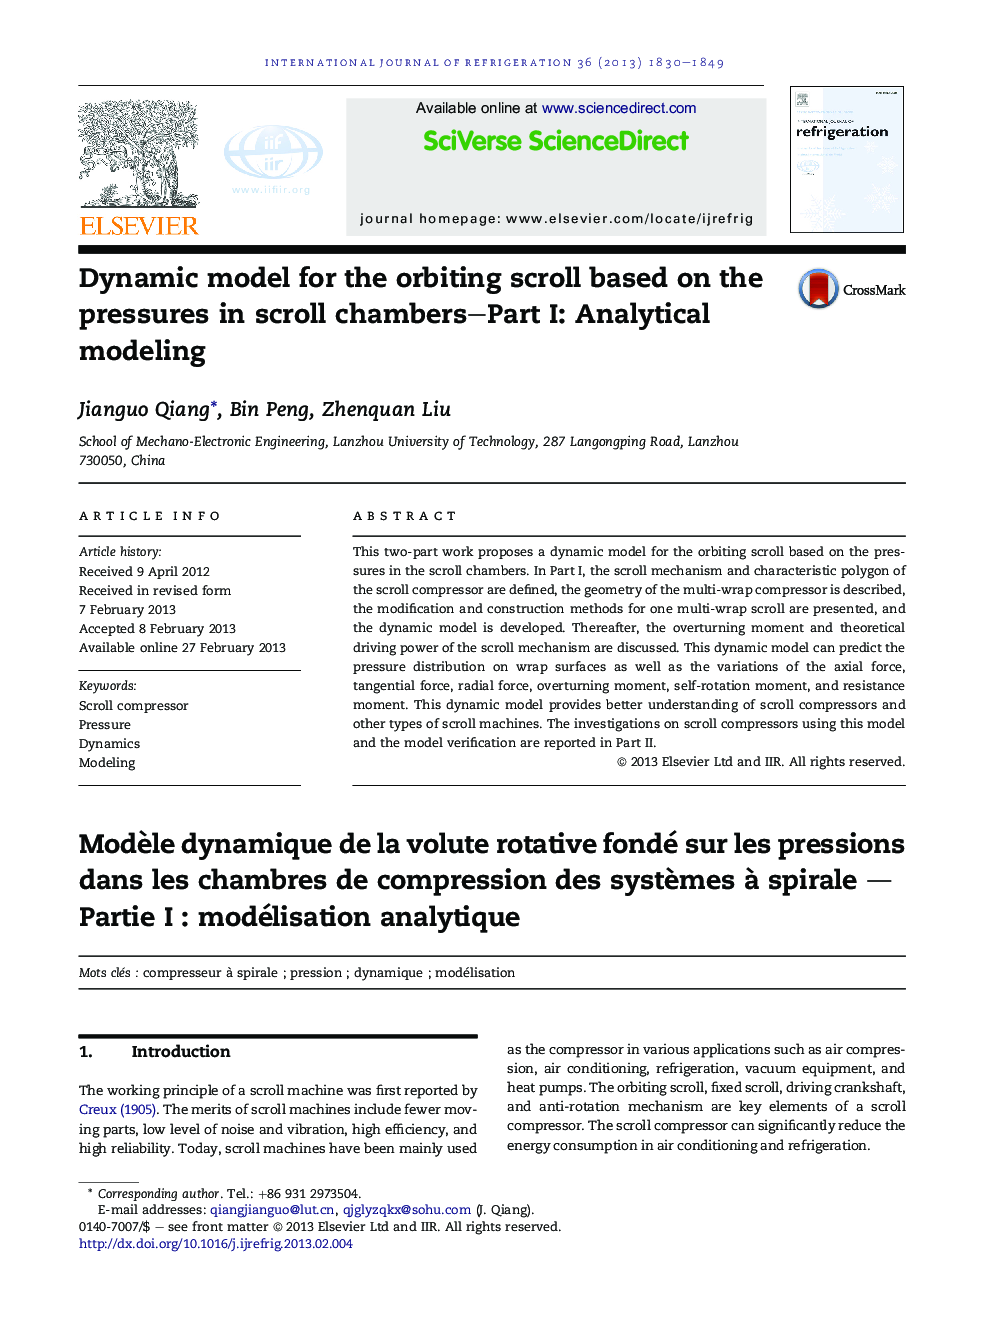 Dynamic model for the orbiting scroll based on the pressures in scroll chambers–Part I: Analytical modeling